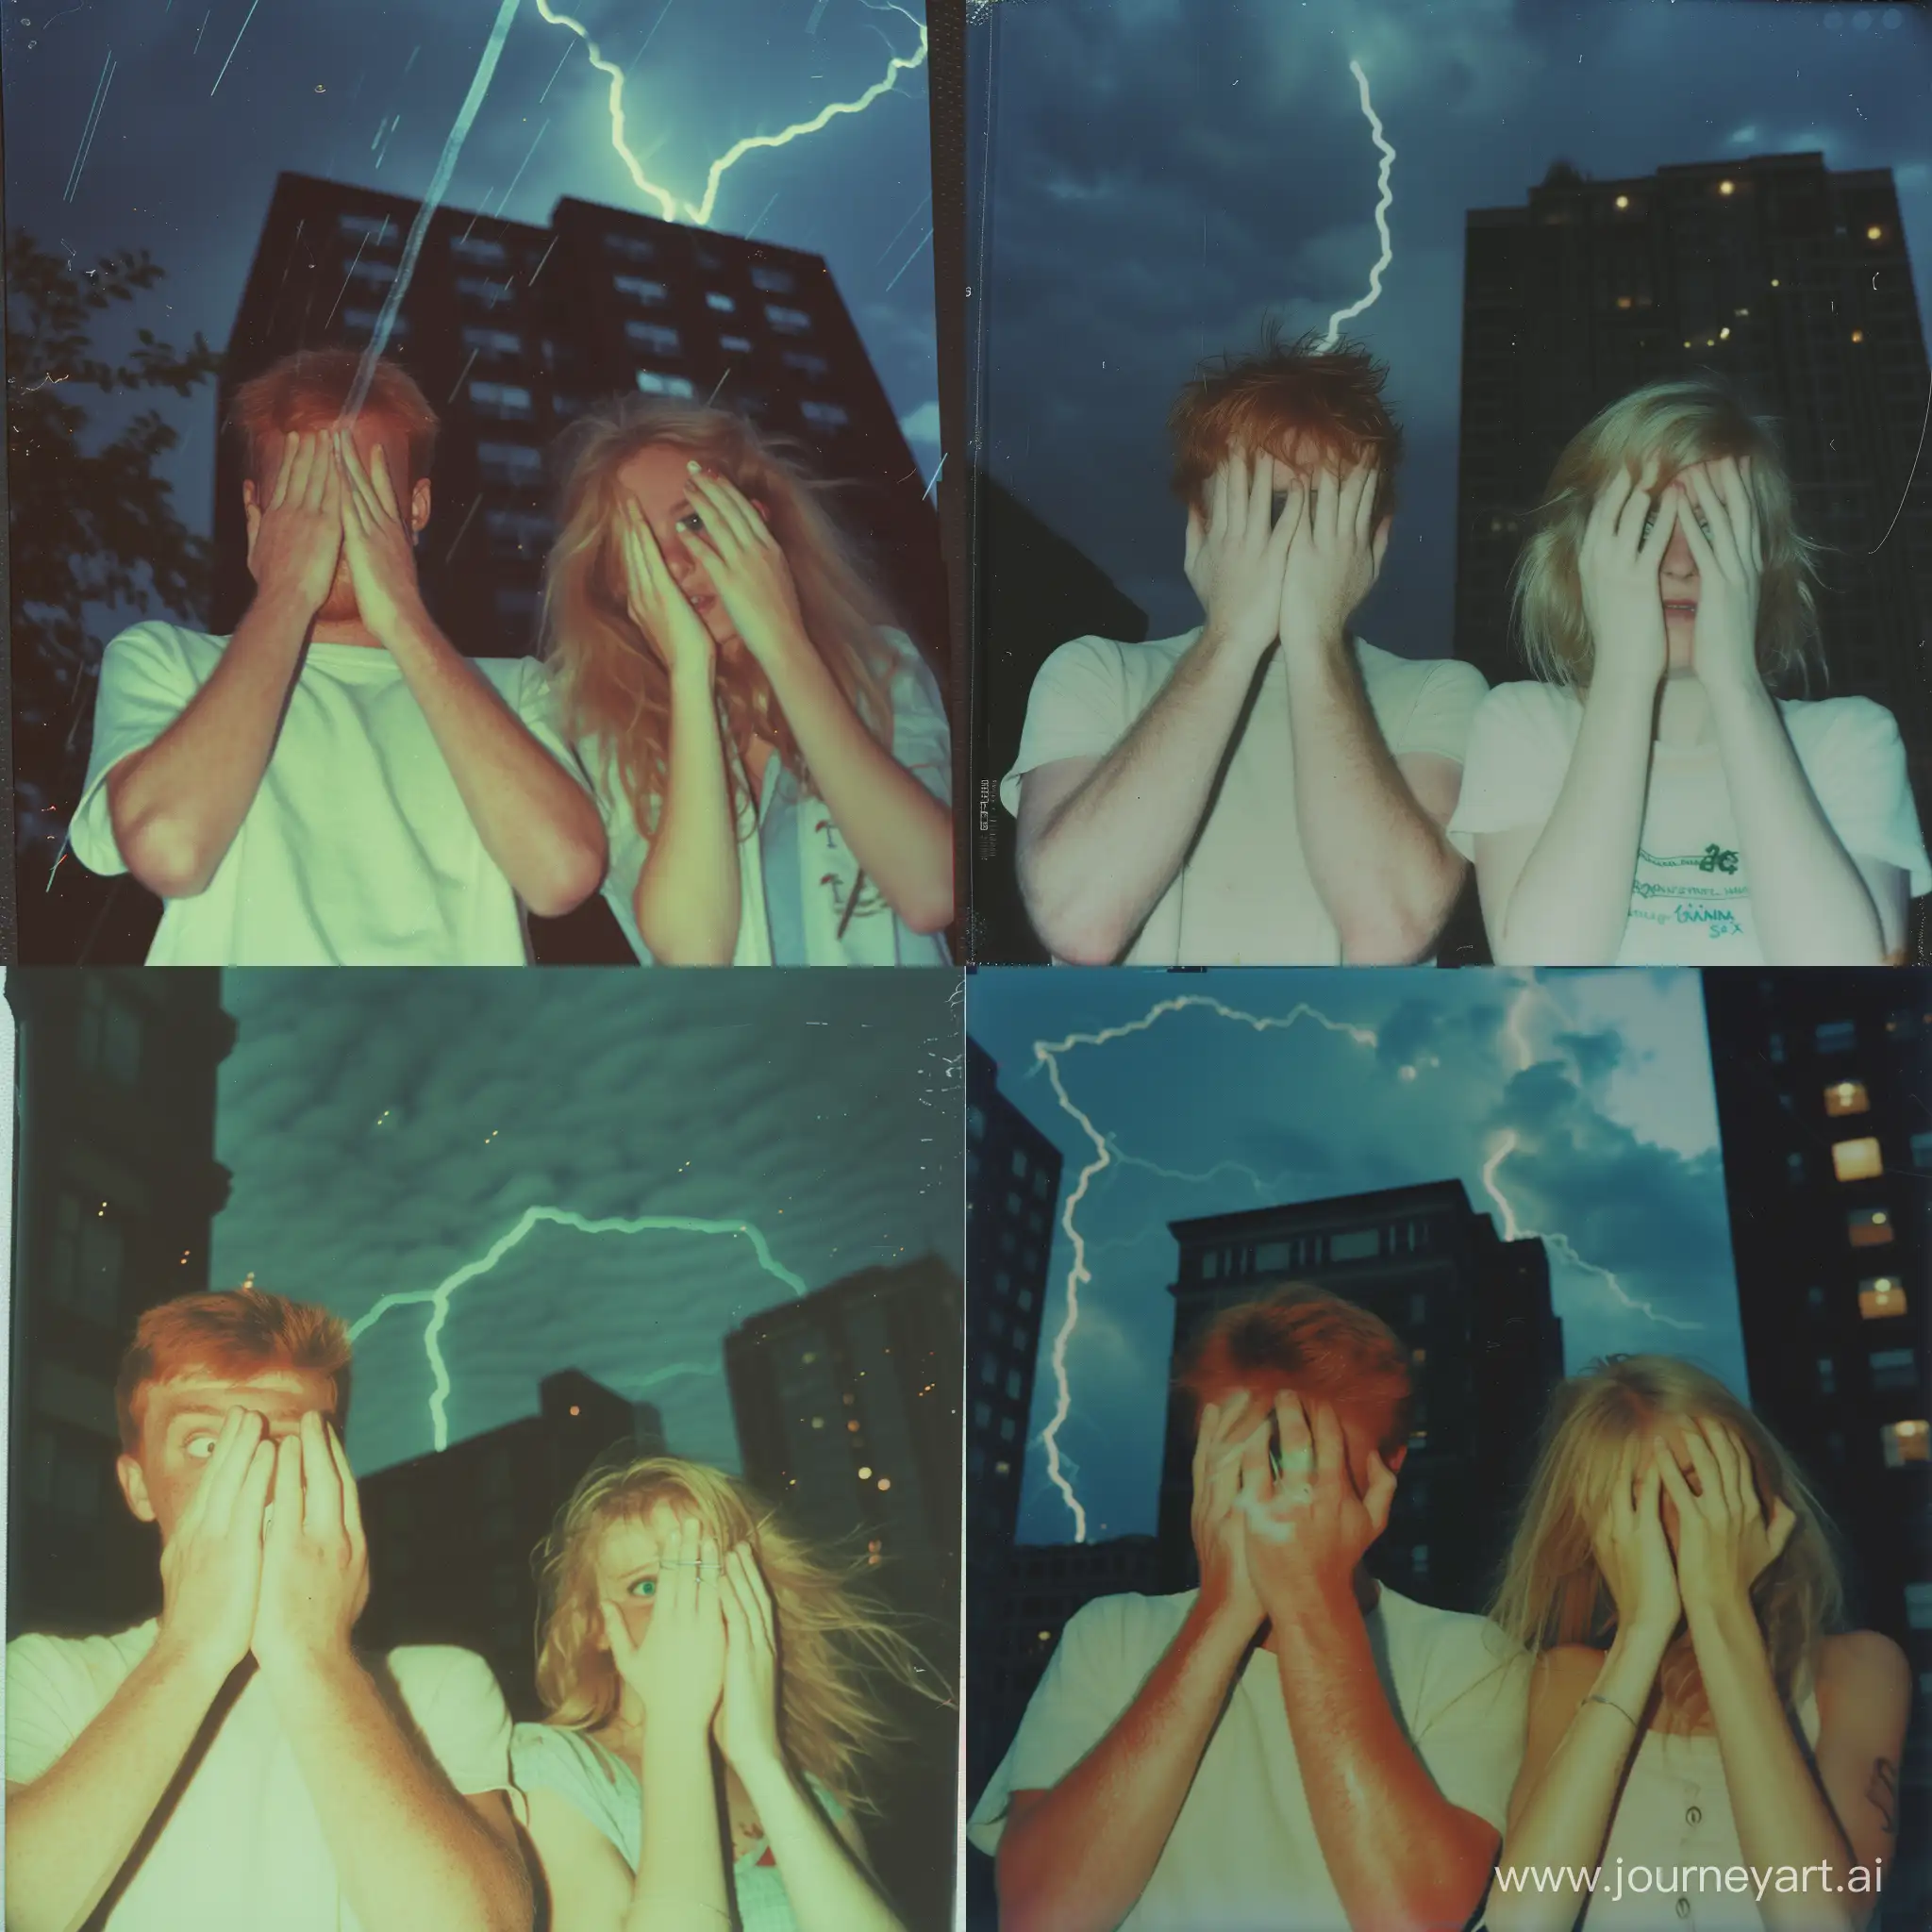 ultra-realitic photo, 16mm, grainy, night building urban scene, redhead man in cotton t-shirt and light-biege-blond girl, they are hiding faces with hands. she looks at the sky. we can see her green eyes. artifacts of film processing. photo from 90s. drammatic lightning in the sky. shot on Polaroid SX-70
